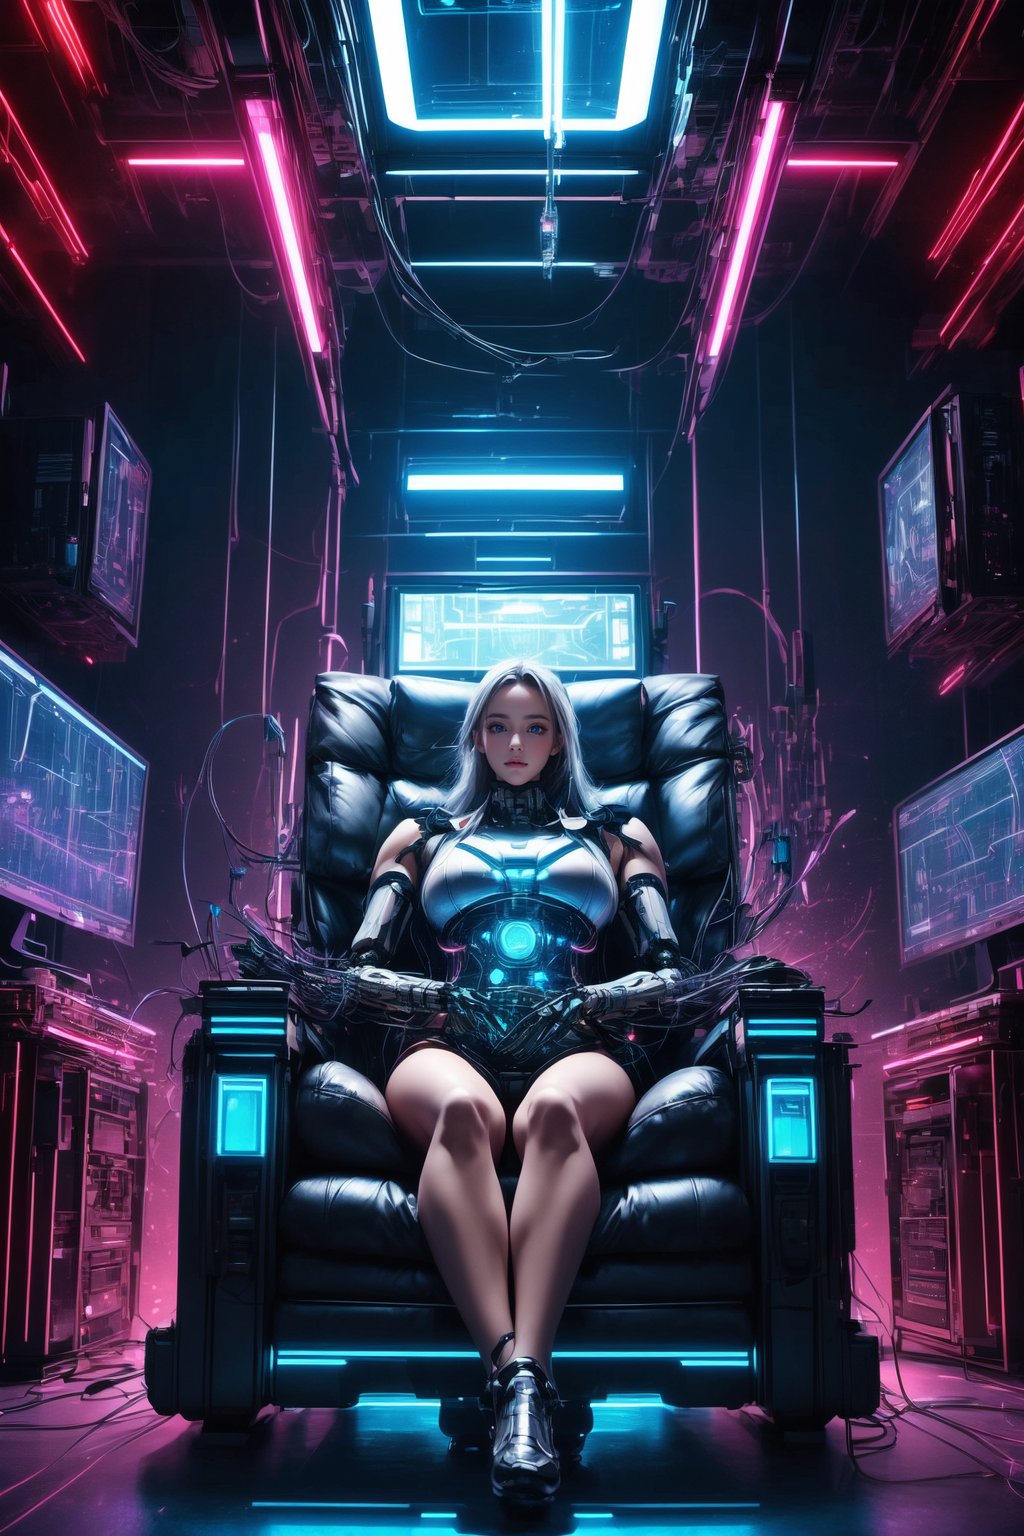 High-quality, photorealistic digital art, 64K HDR, bright-lit cyberpunk laboratory scene with a girl in mechanized armor sitting in an energy chair, surrounded by wires and futuristic instruments, symmetric composition, (Cyberpunk:1.4), (Mecha-armored girl:1.3), (energy chair:1.2), by FuturEvoLab, advanced technology, metallic textures, contrasting neon lighting, dynamic ambiance, futuristic.